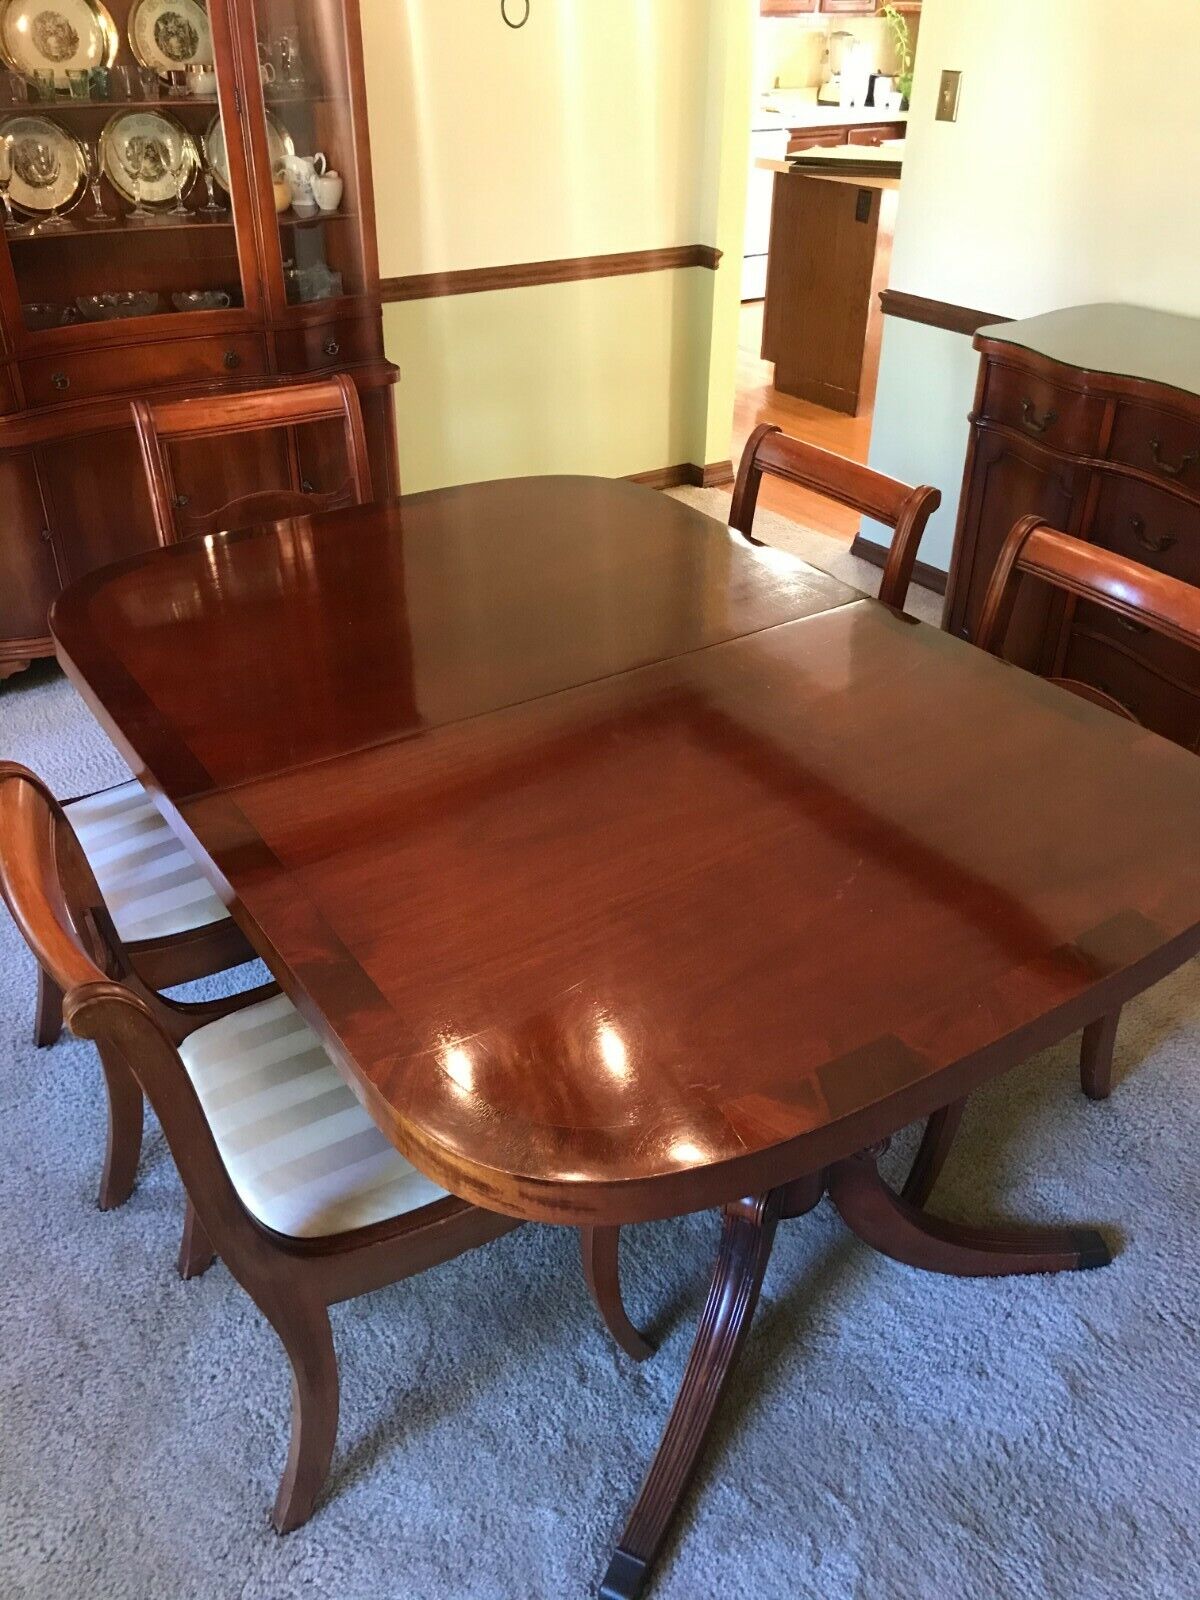 Morganton Mahogany 8 pc dining room furniture w 3 table ext in great condition